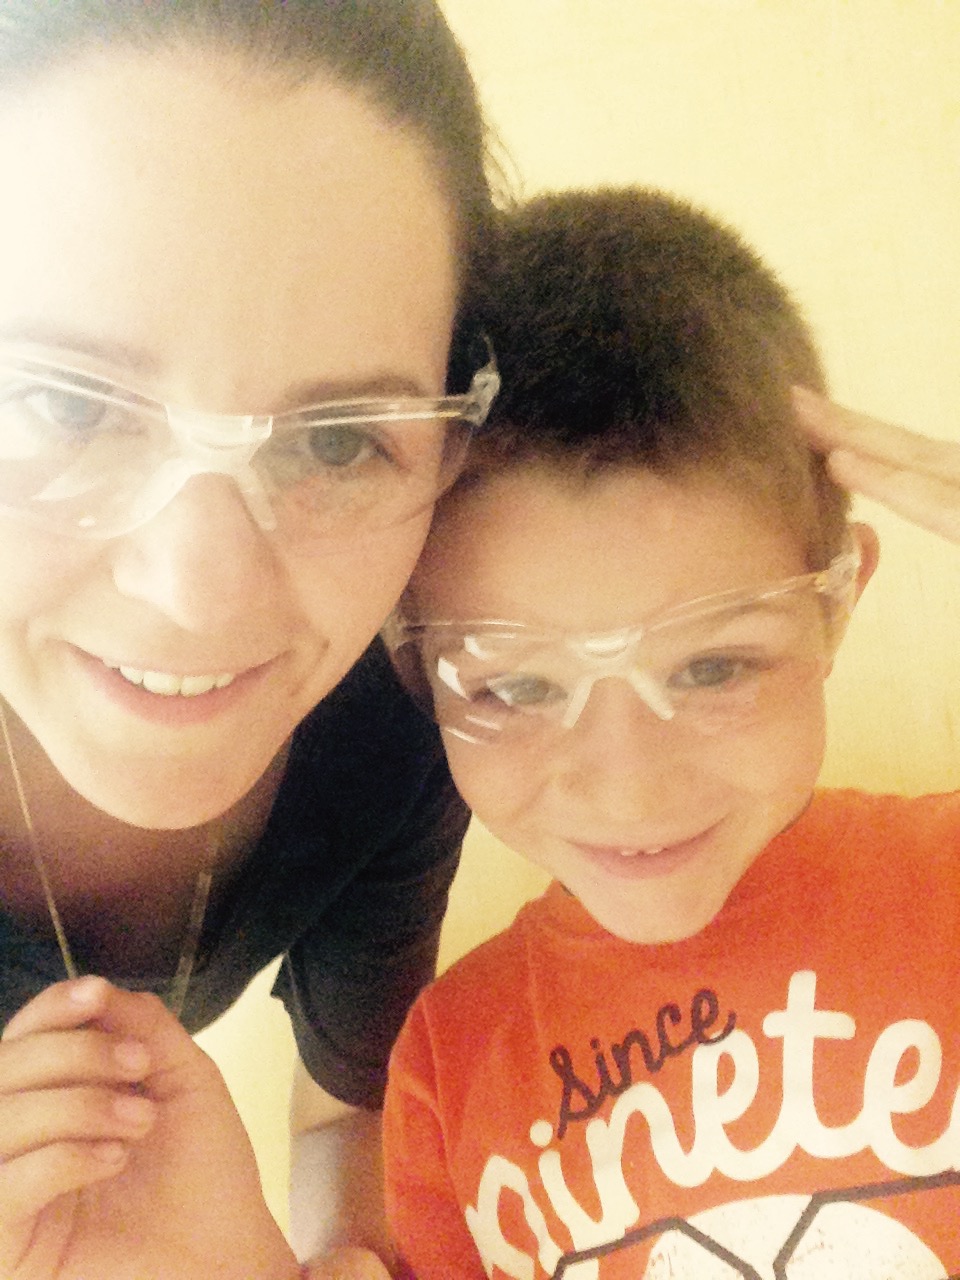 Safety glasses- because safe science is fun science!